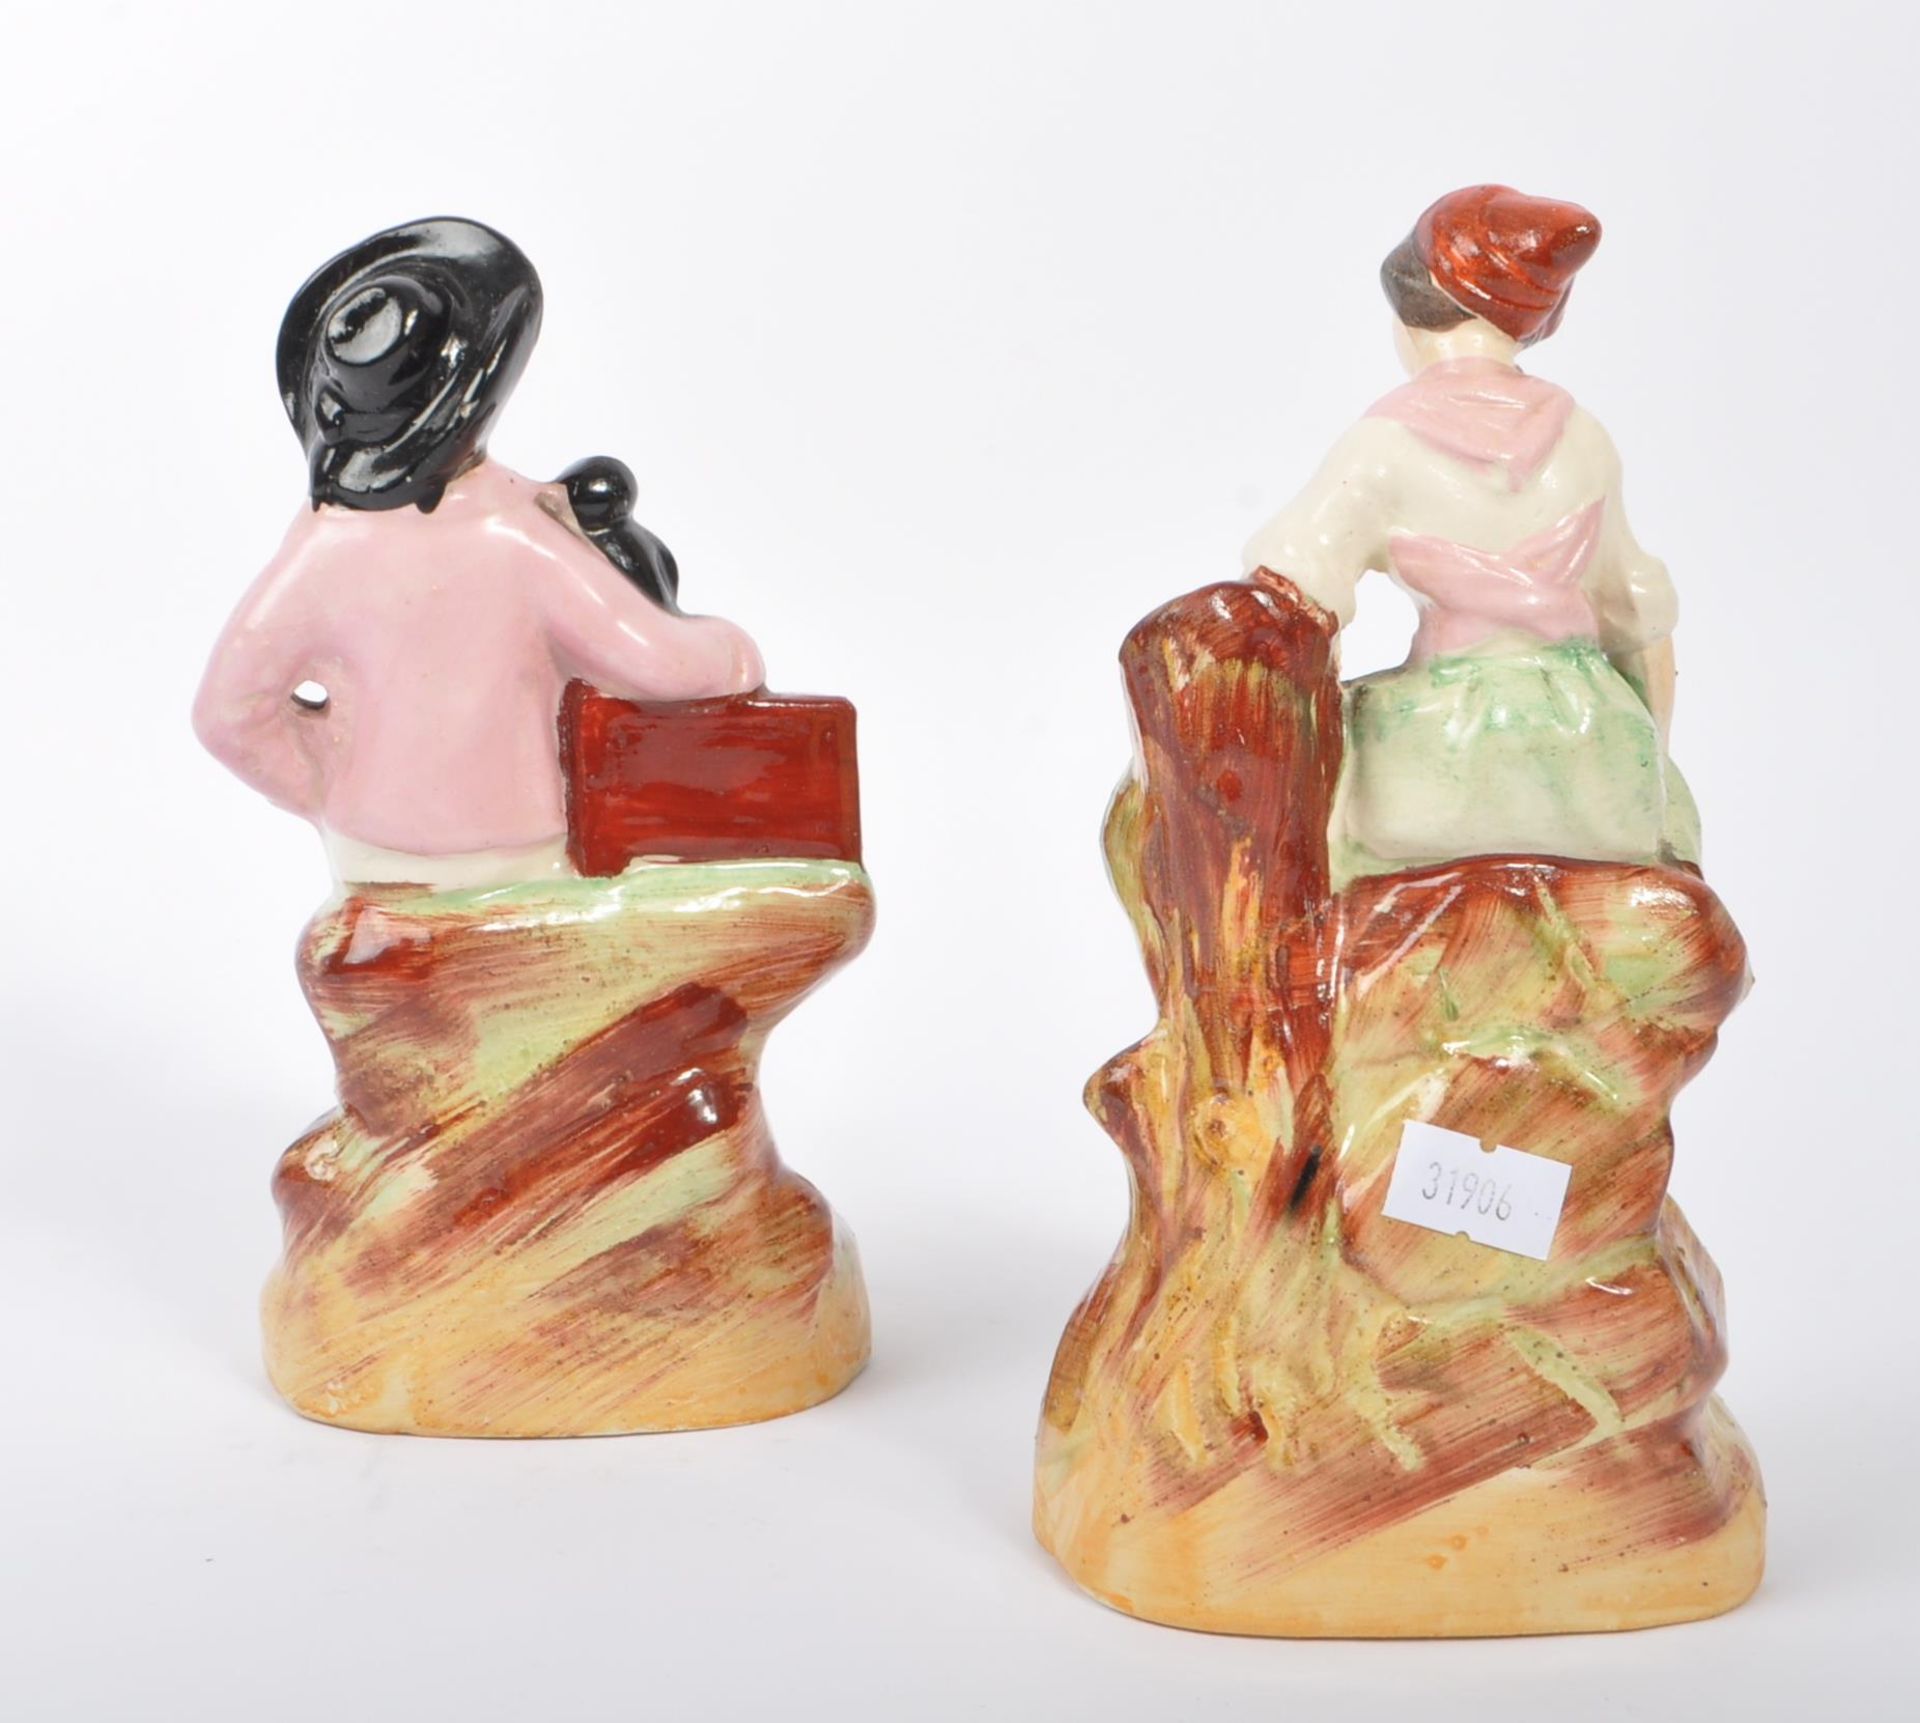 PAIR OF 19TH CENTURY VICTORIAN STAFFORDSHIRE FIGURES - Image 2 of 4